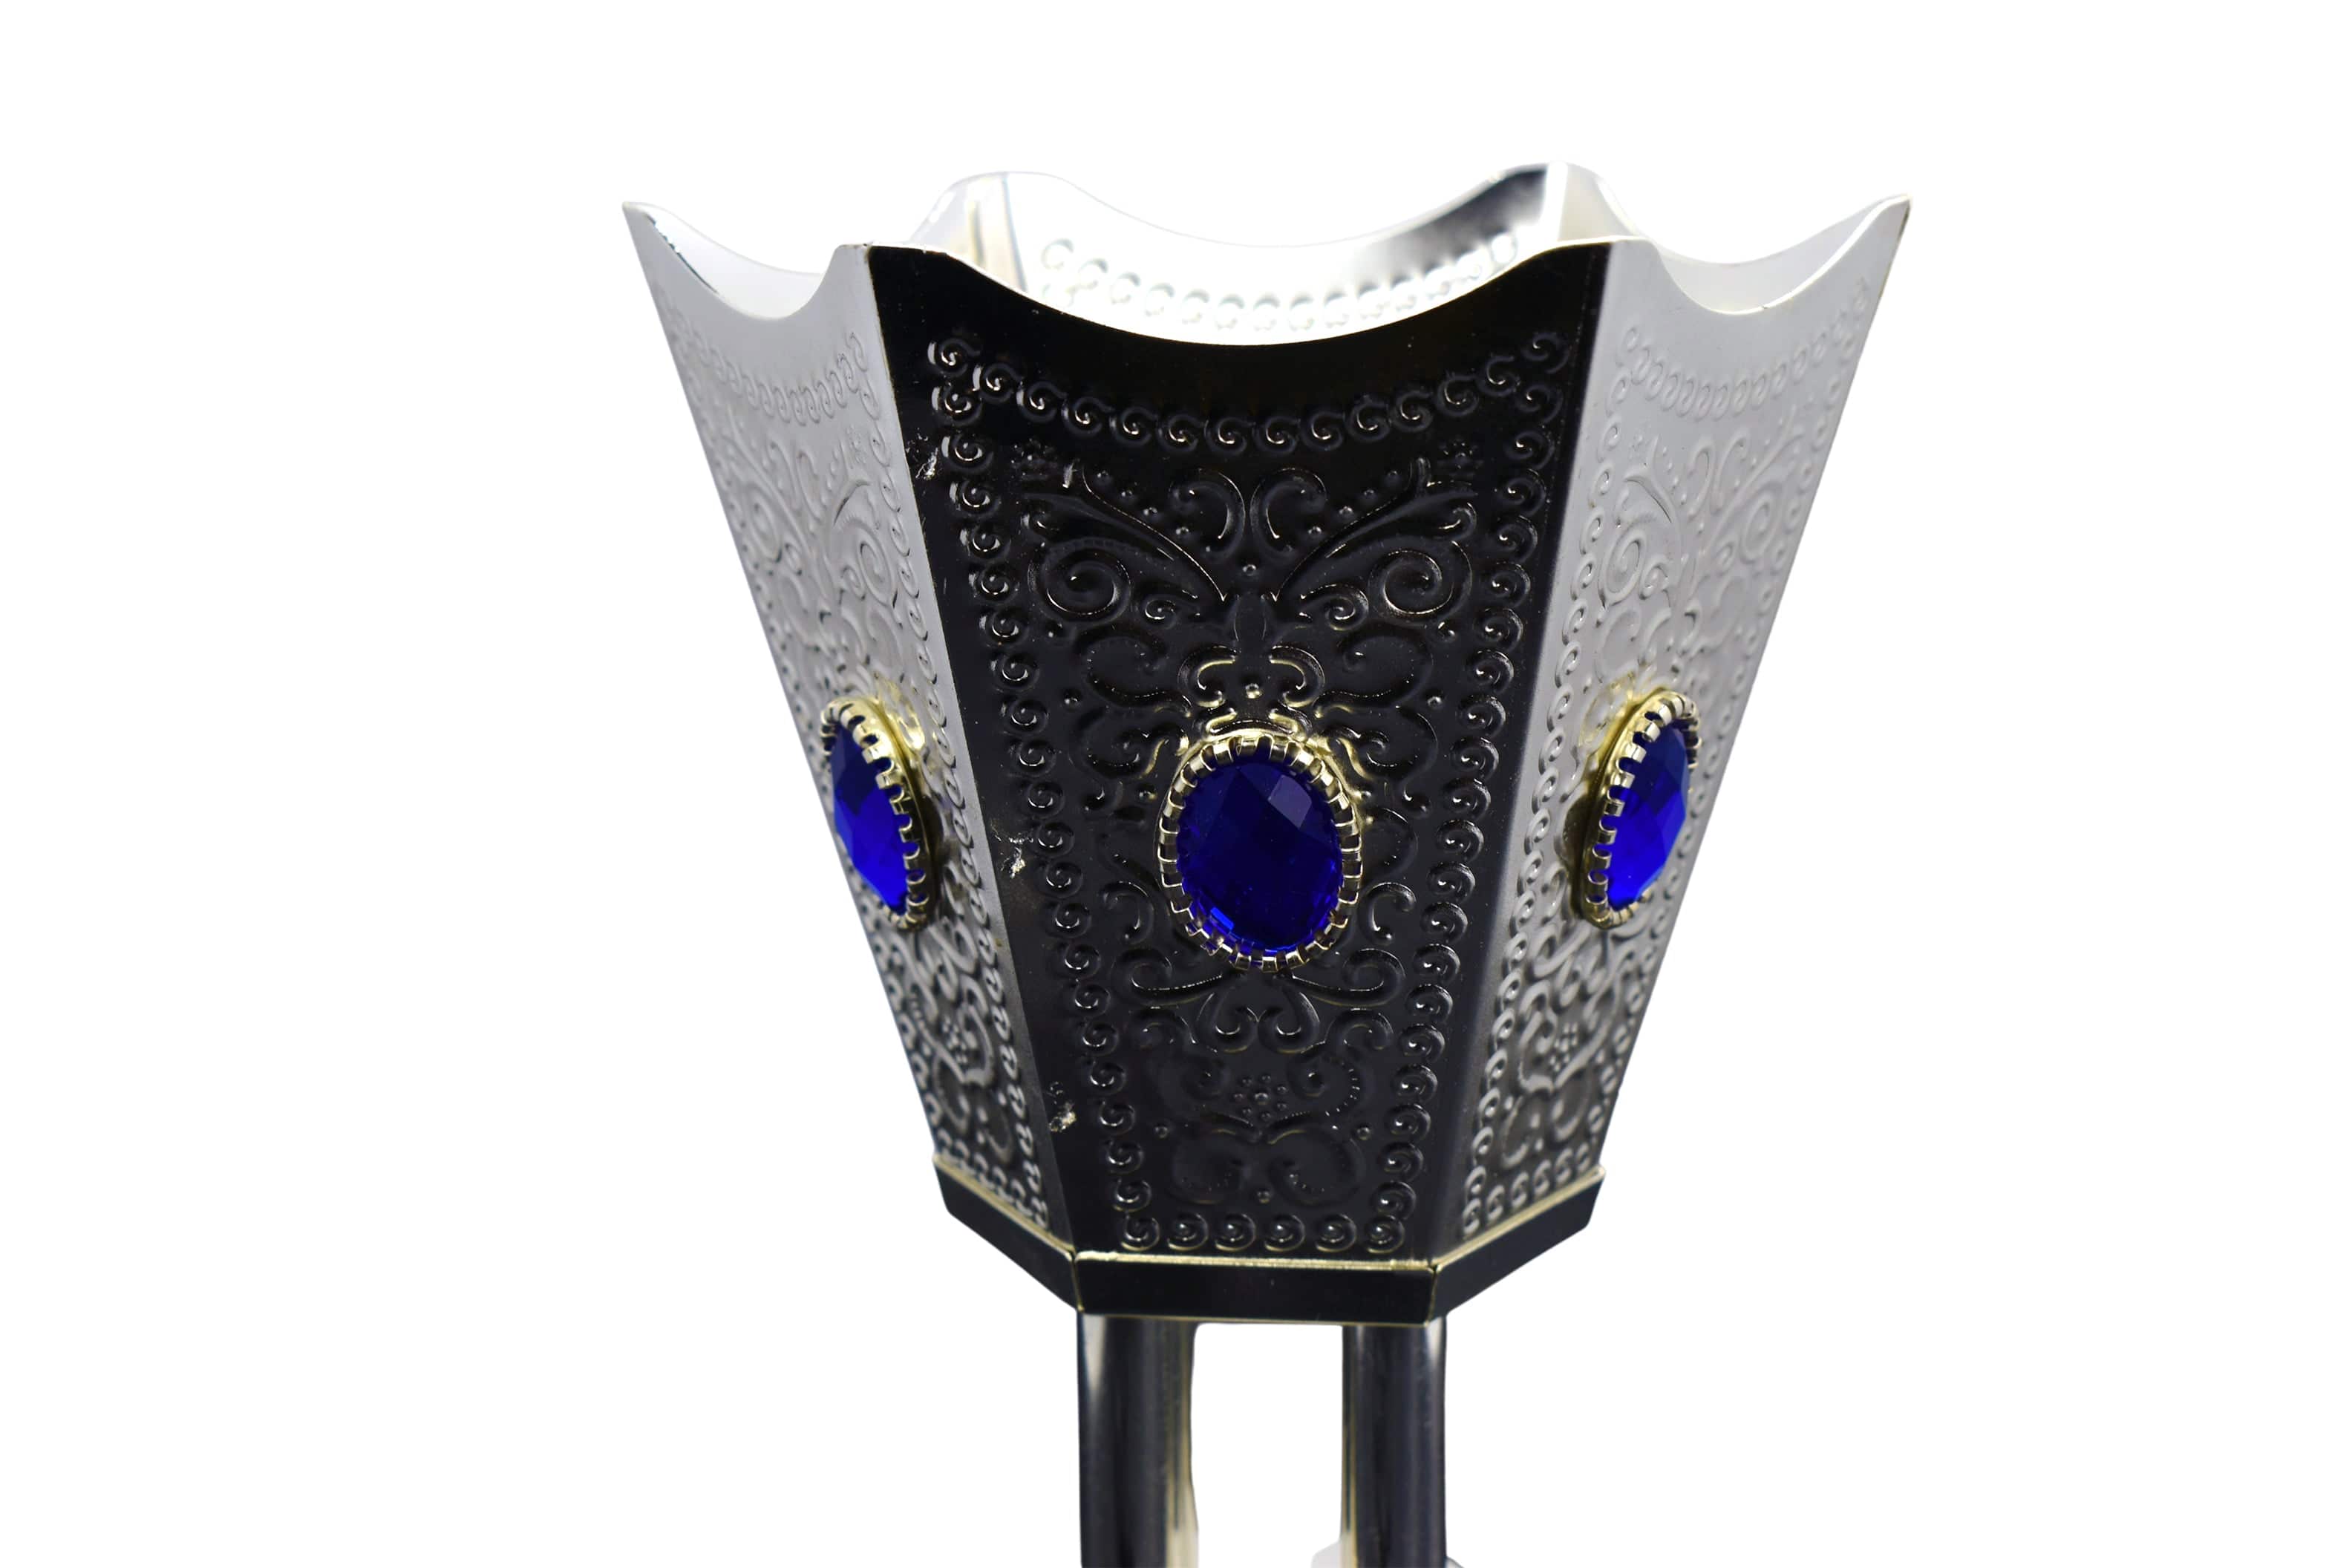 New Sapphire Hexagon Shaped Electric Incense Bakhoor Burner by Intense Oud - Intense oud